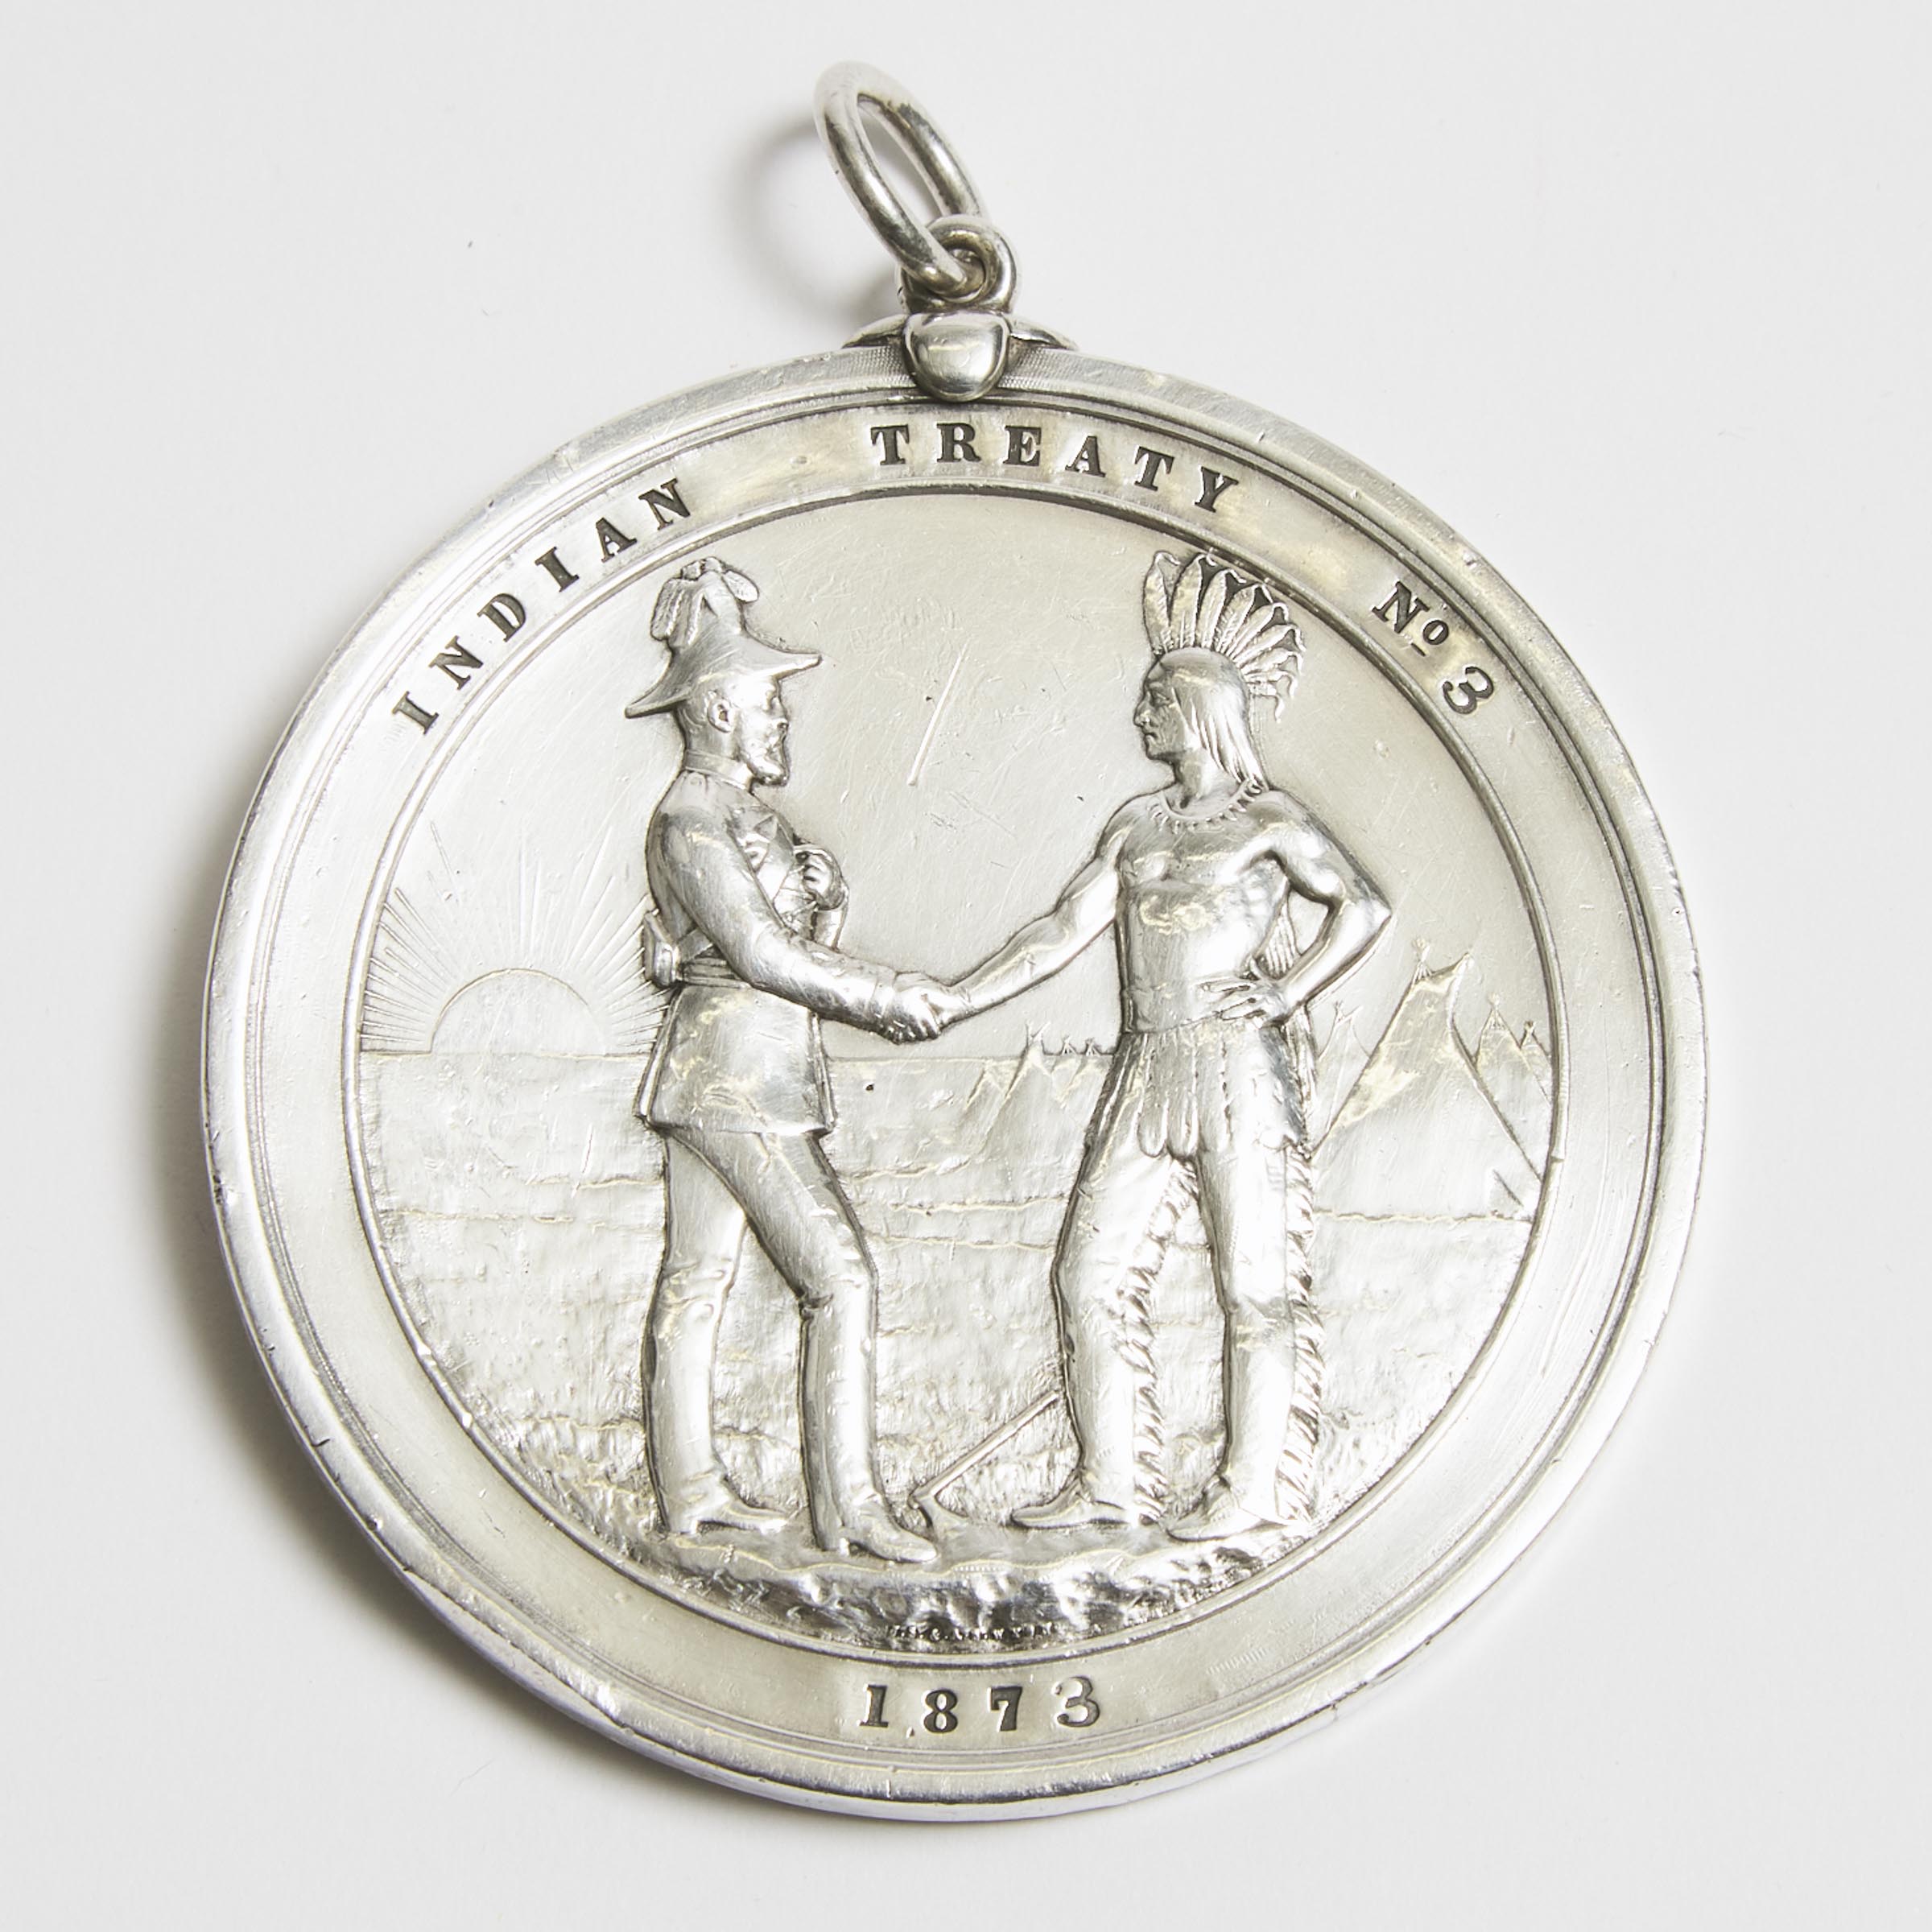 Cased Canadian Indian Peace Treaty No. 3 Silver Medal, 1873